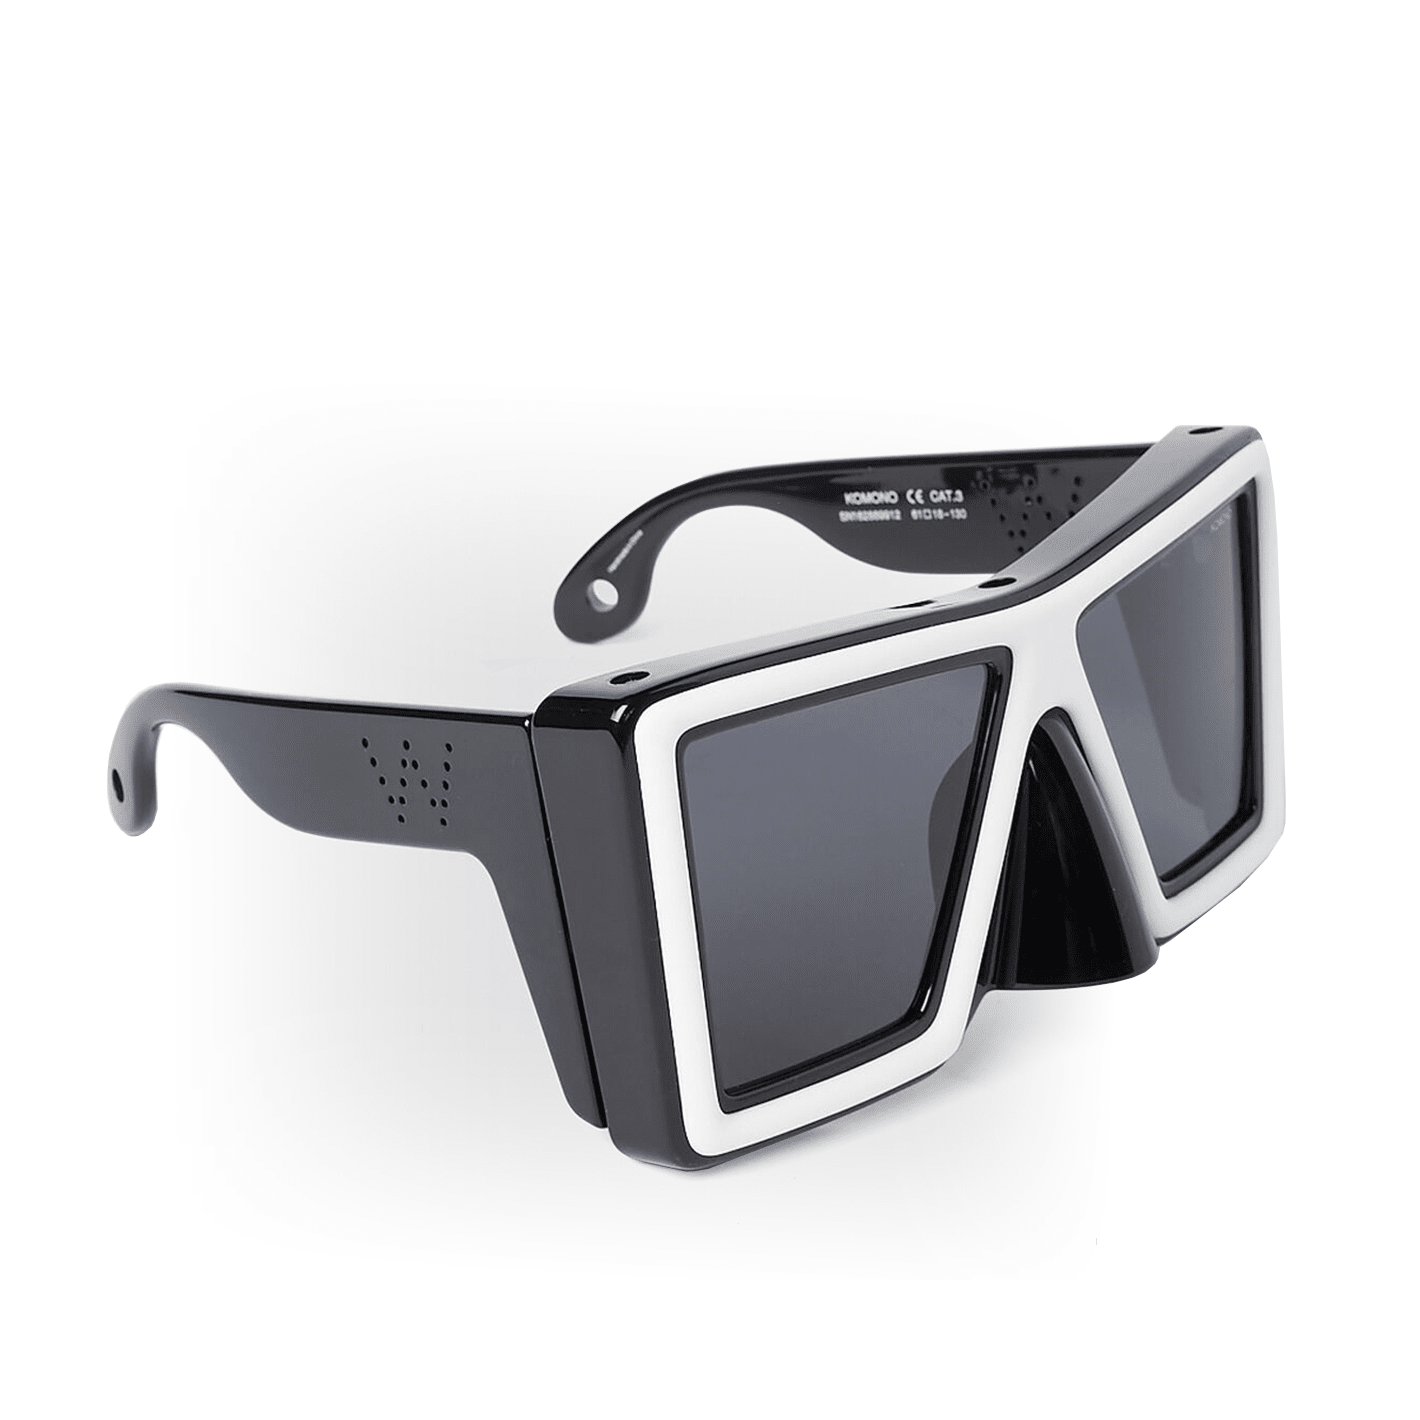 Otherworldly Sunglasses (Black / Off-White) – Congruent Space *₊˚⁎*₊